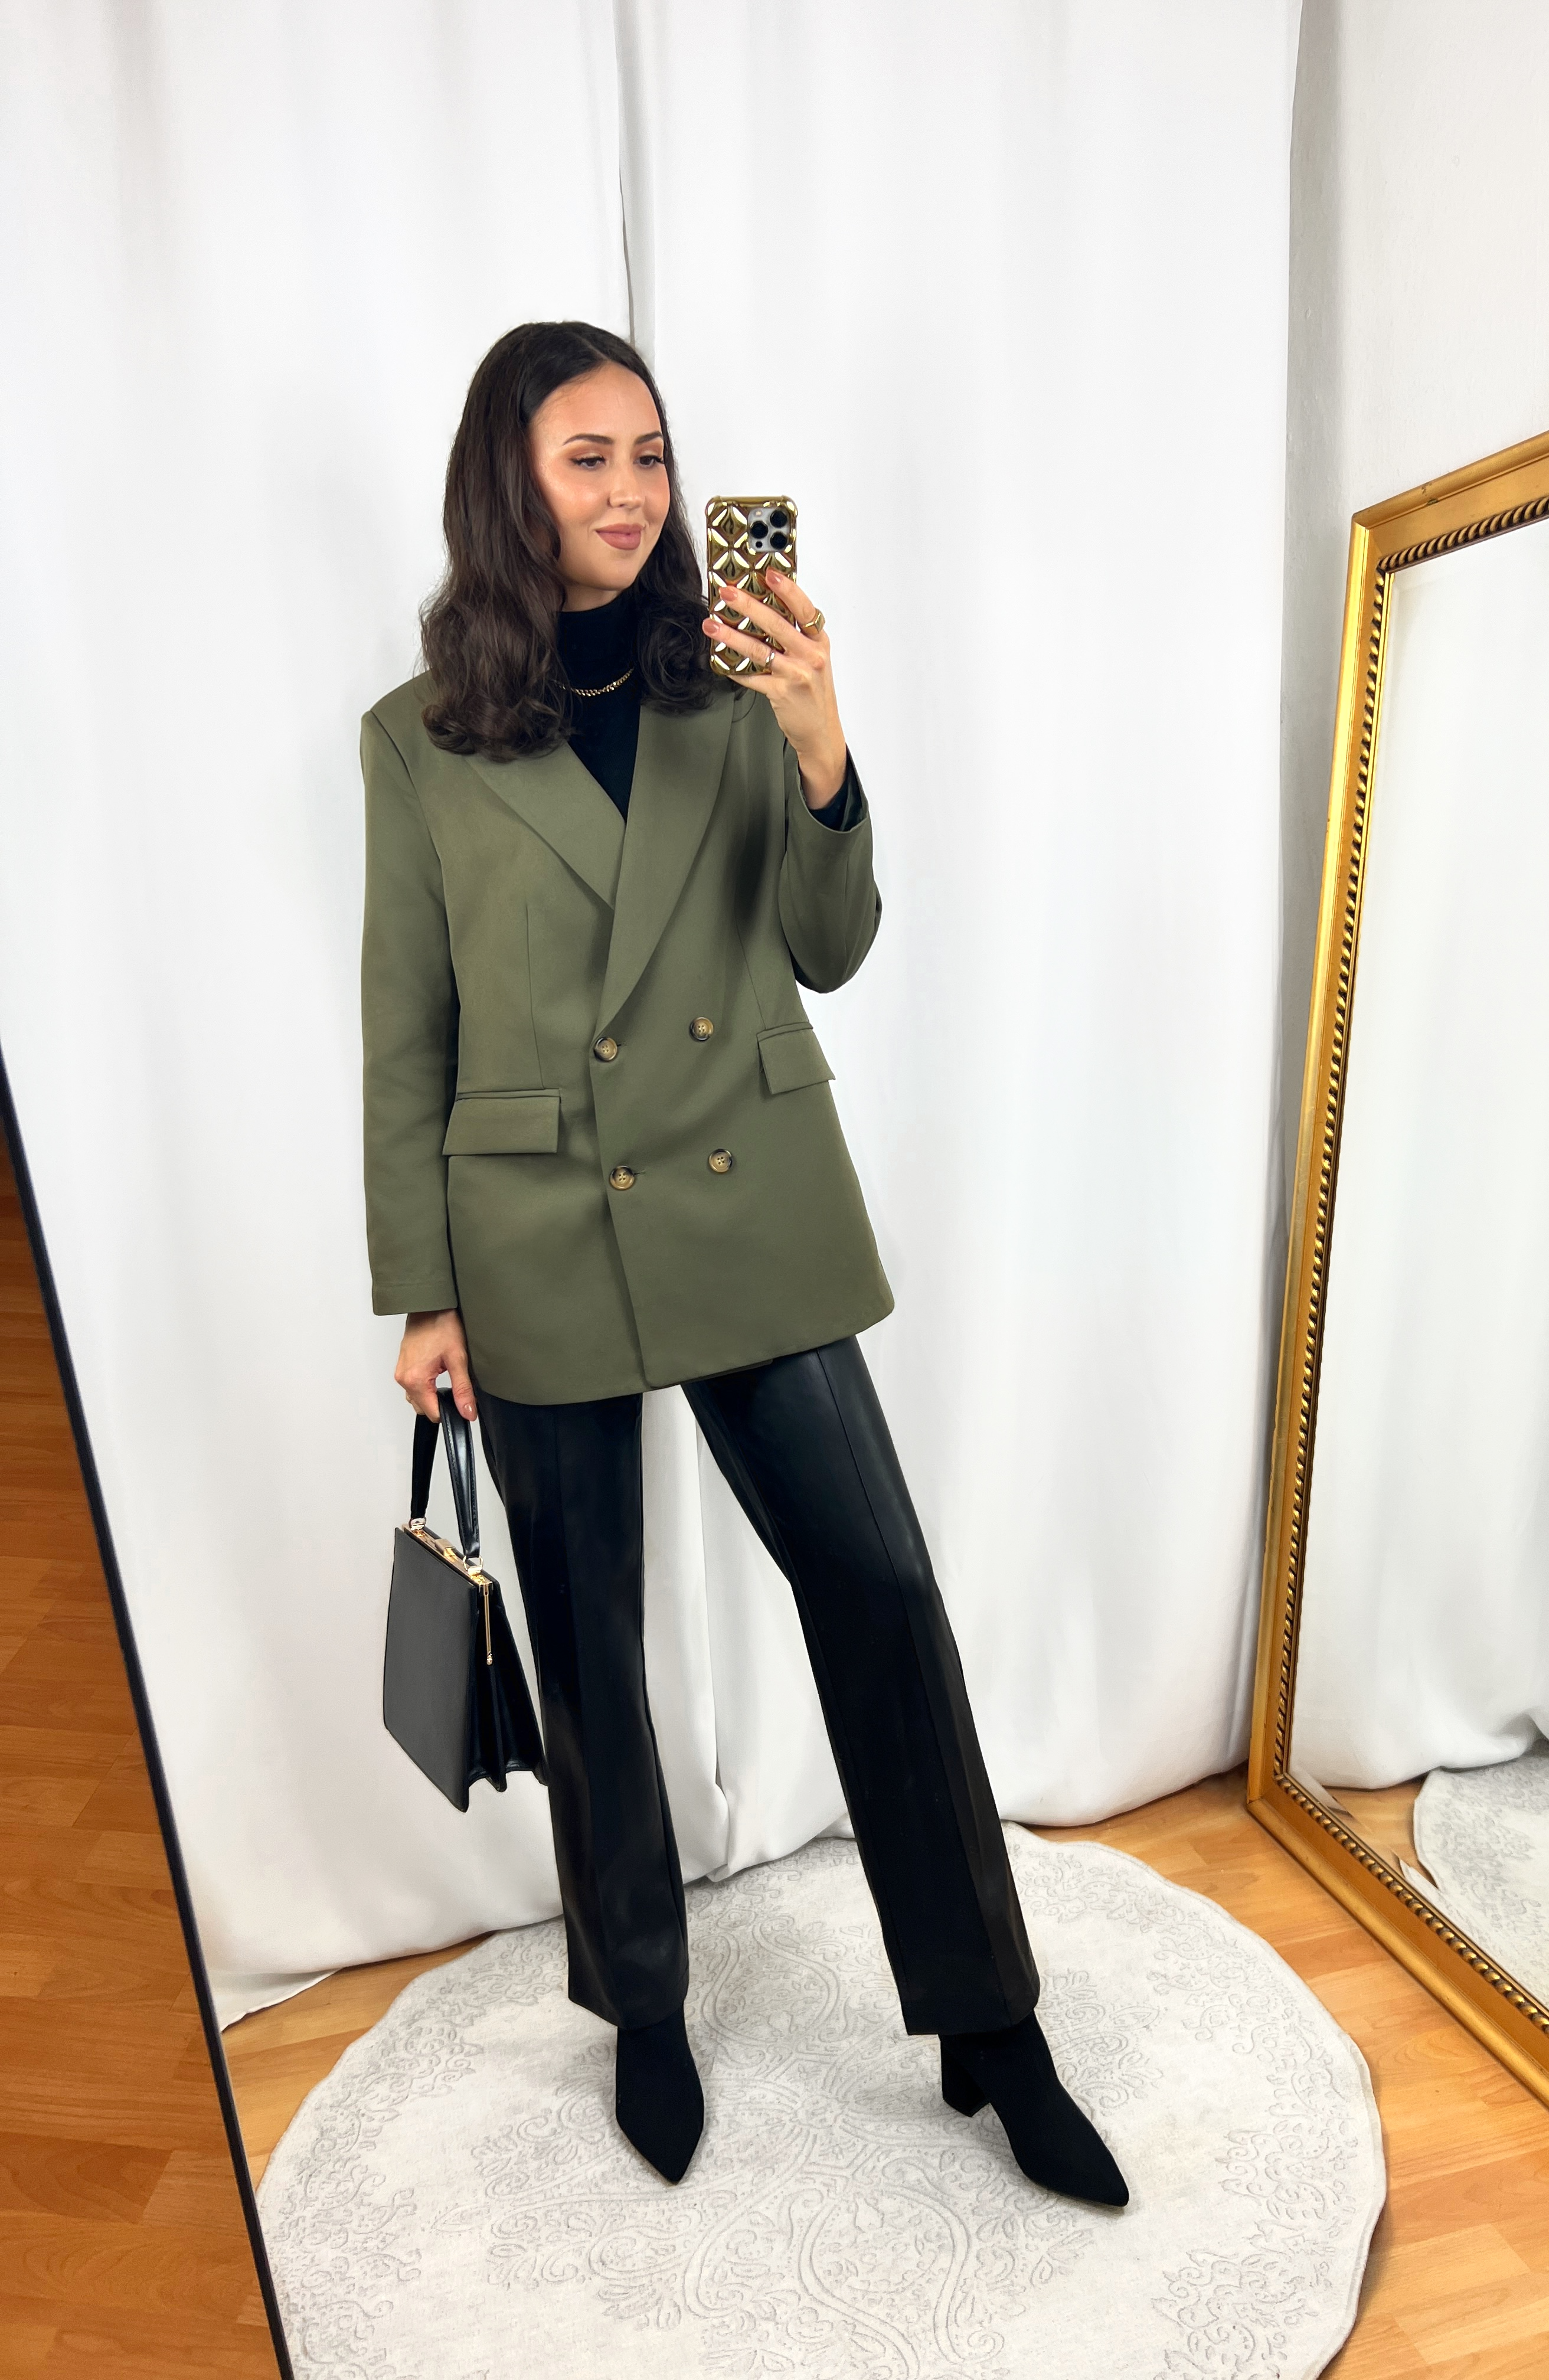 Olive Green Blazer Outfit with Black Leather Pants